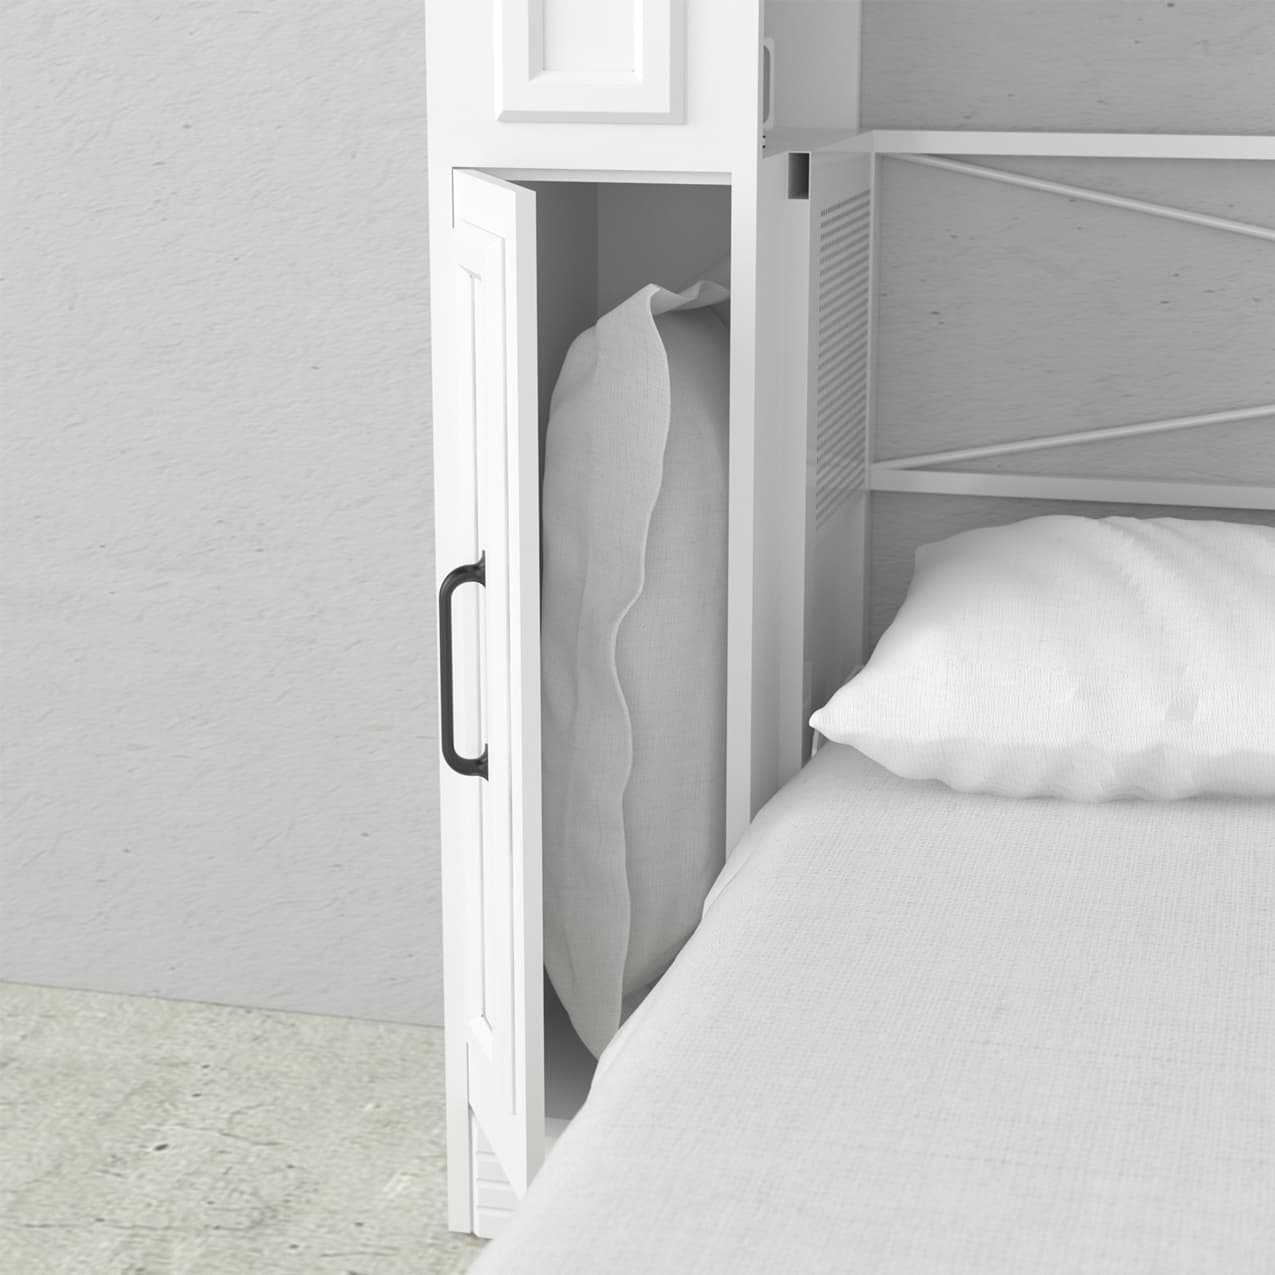 Alegra queen murphy bed with integrated storage pillow cabinet steel frame hidden hide away hide-a-way diy murphy bed kit fold out pull down wall bed cabinet